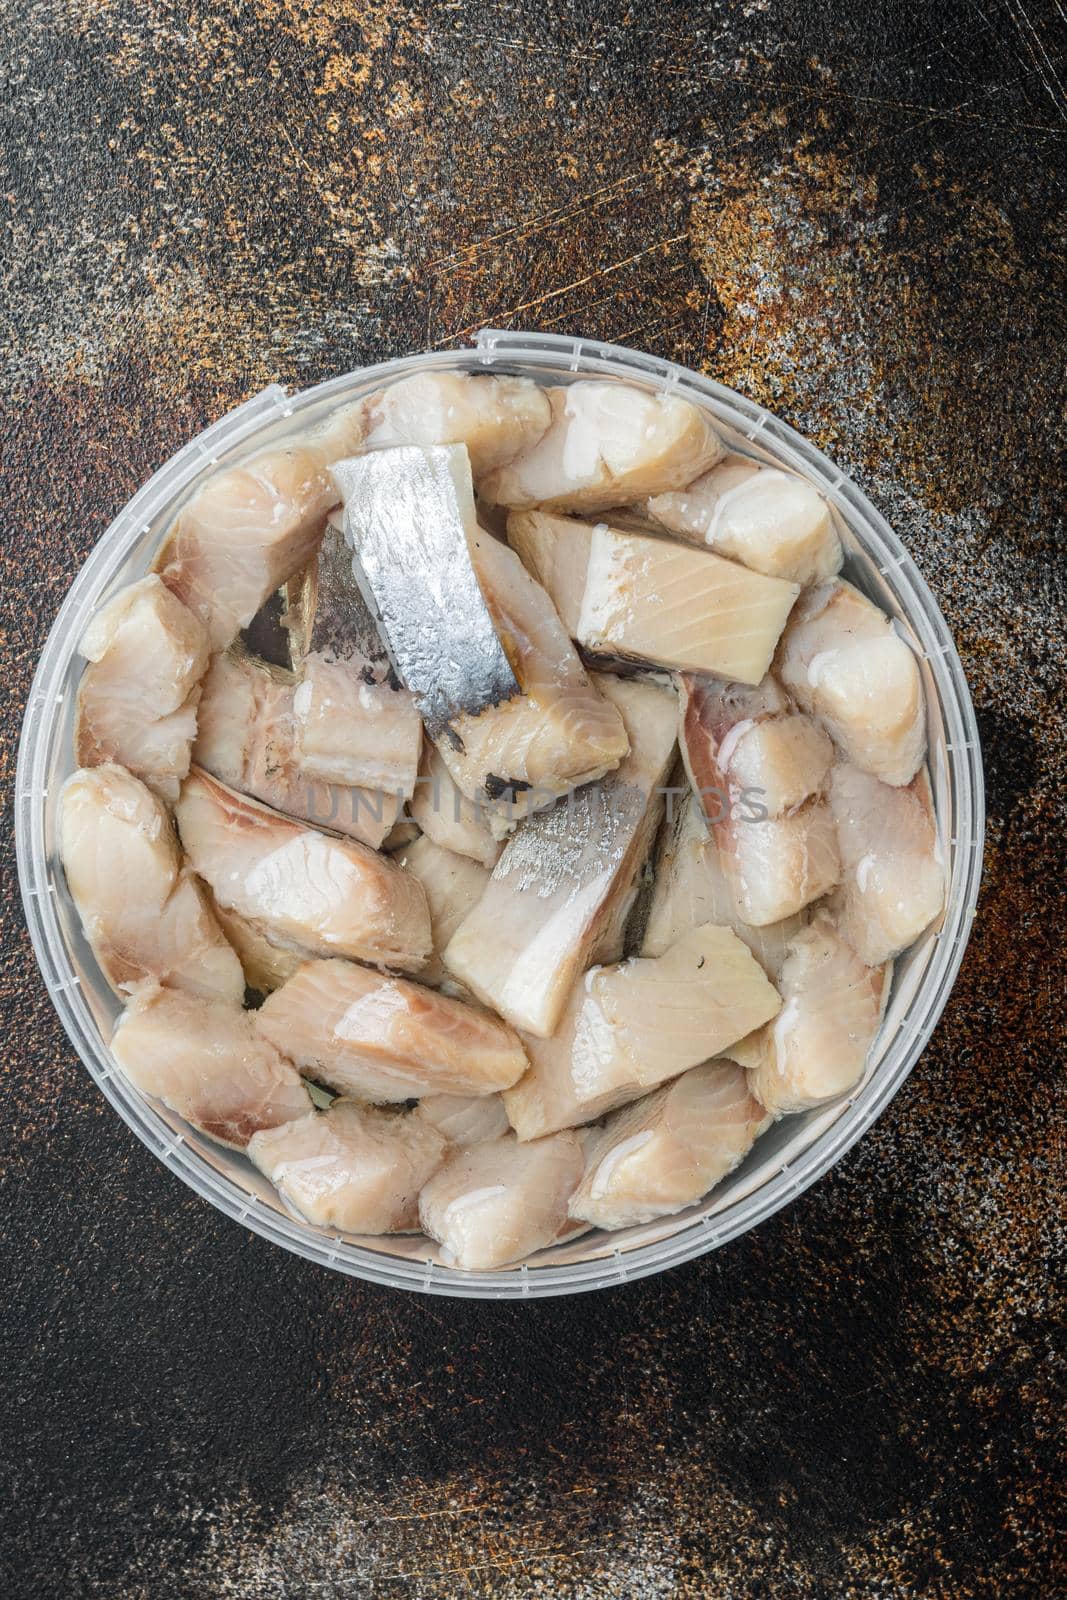 Herring pieces drenched in oil, on old dark rustic background, top view flat lay